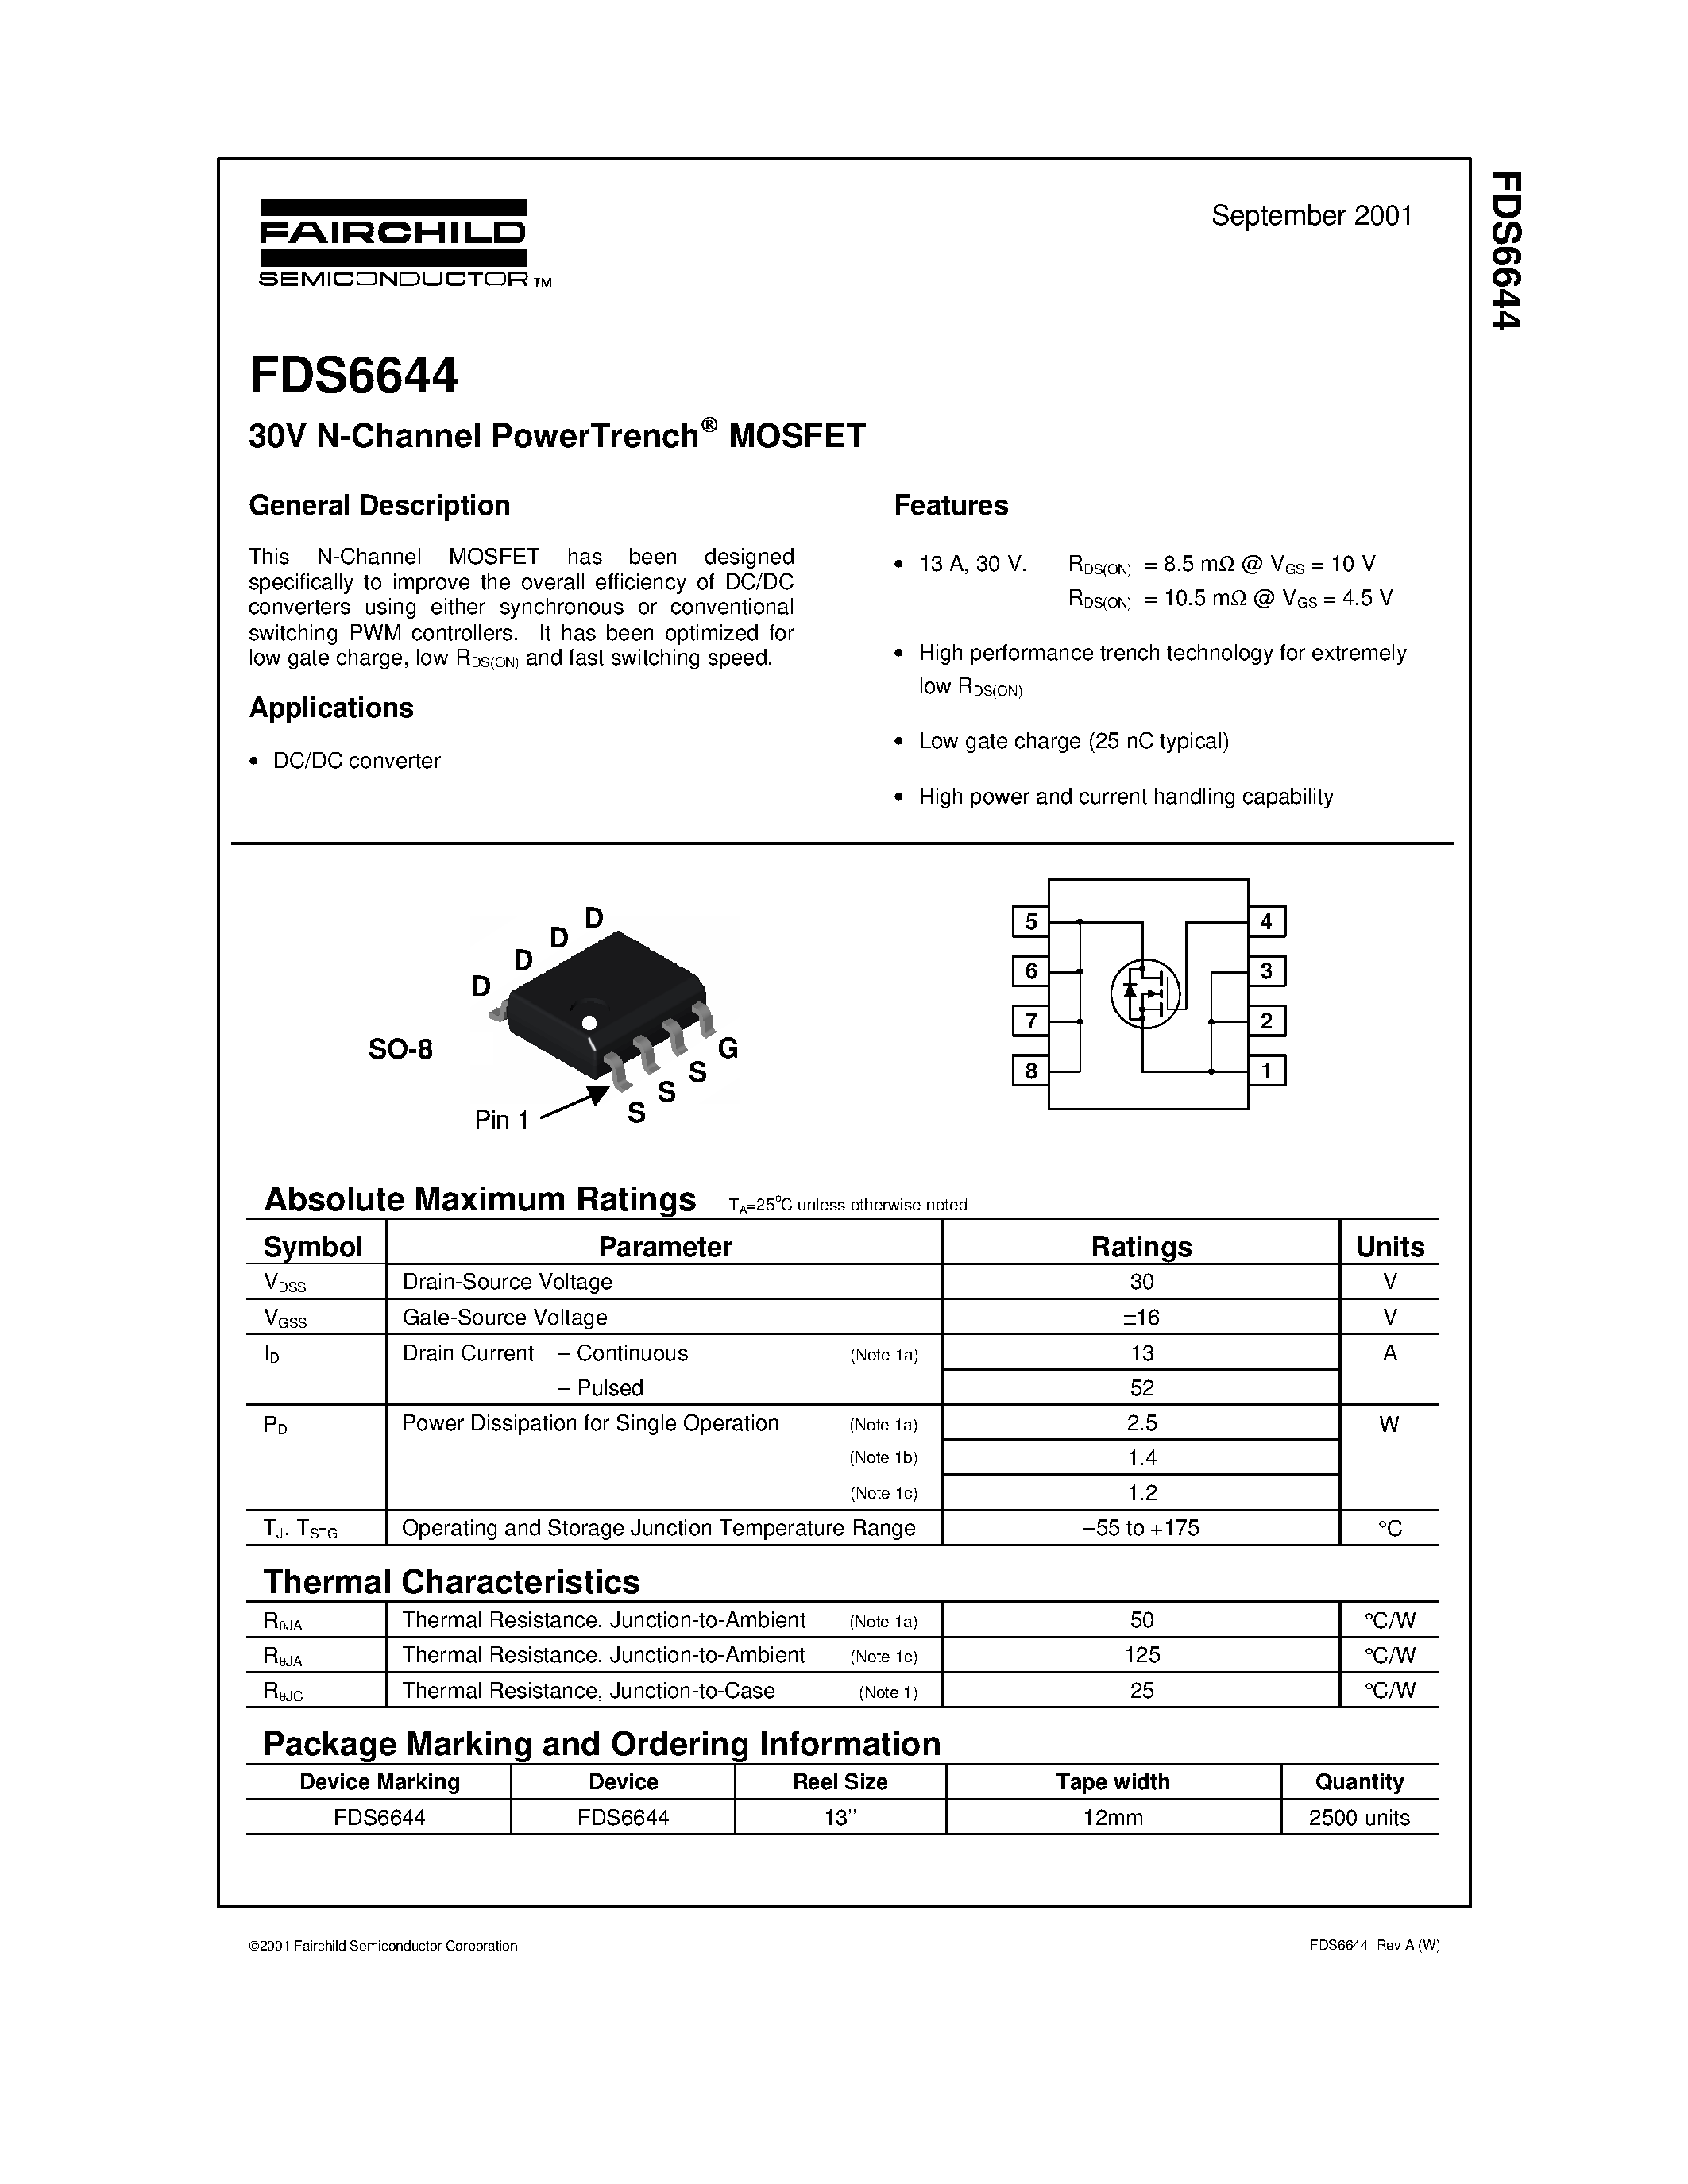 Даташит FDS6644 - 30V N-Channel PowerTrench MOSFET страница 1